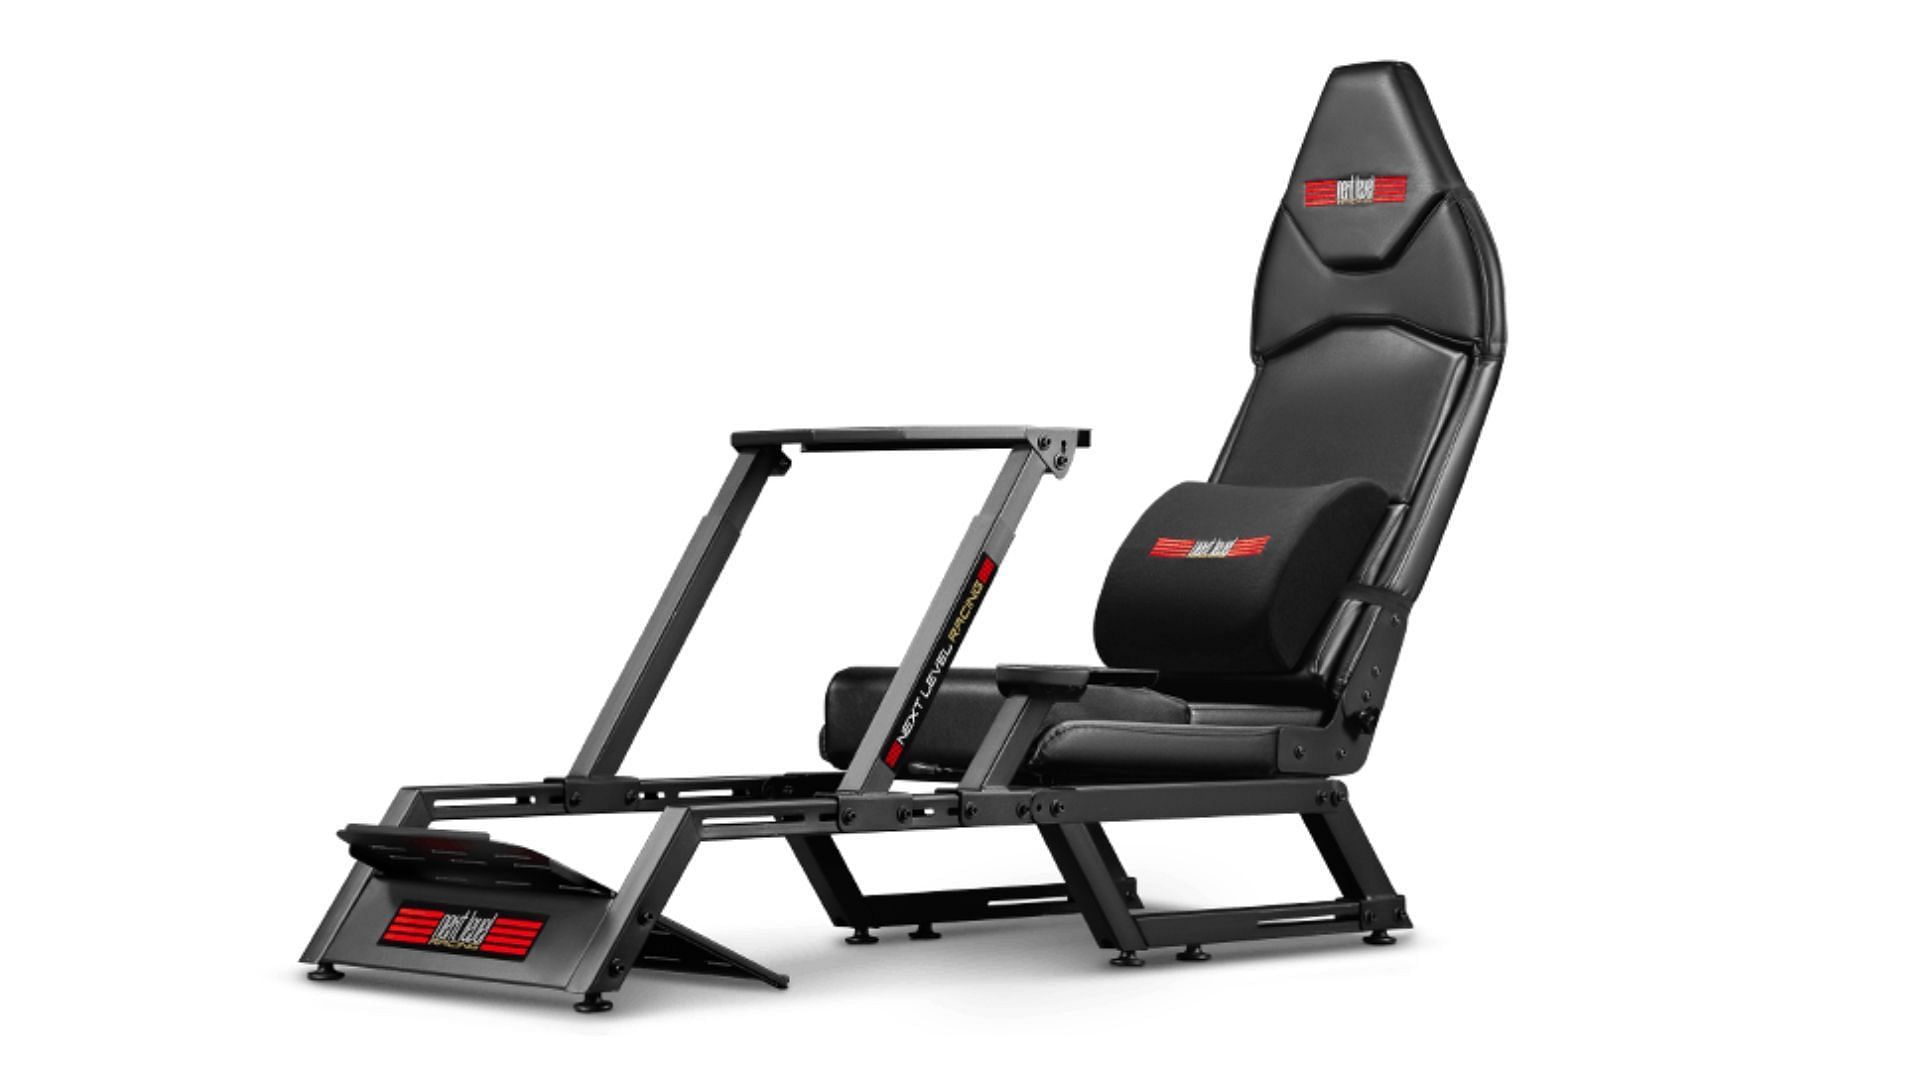 Next Level Racing F-GT is the best option for an affordable but high-performance cockpit (Image via Next Level Racing)